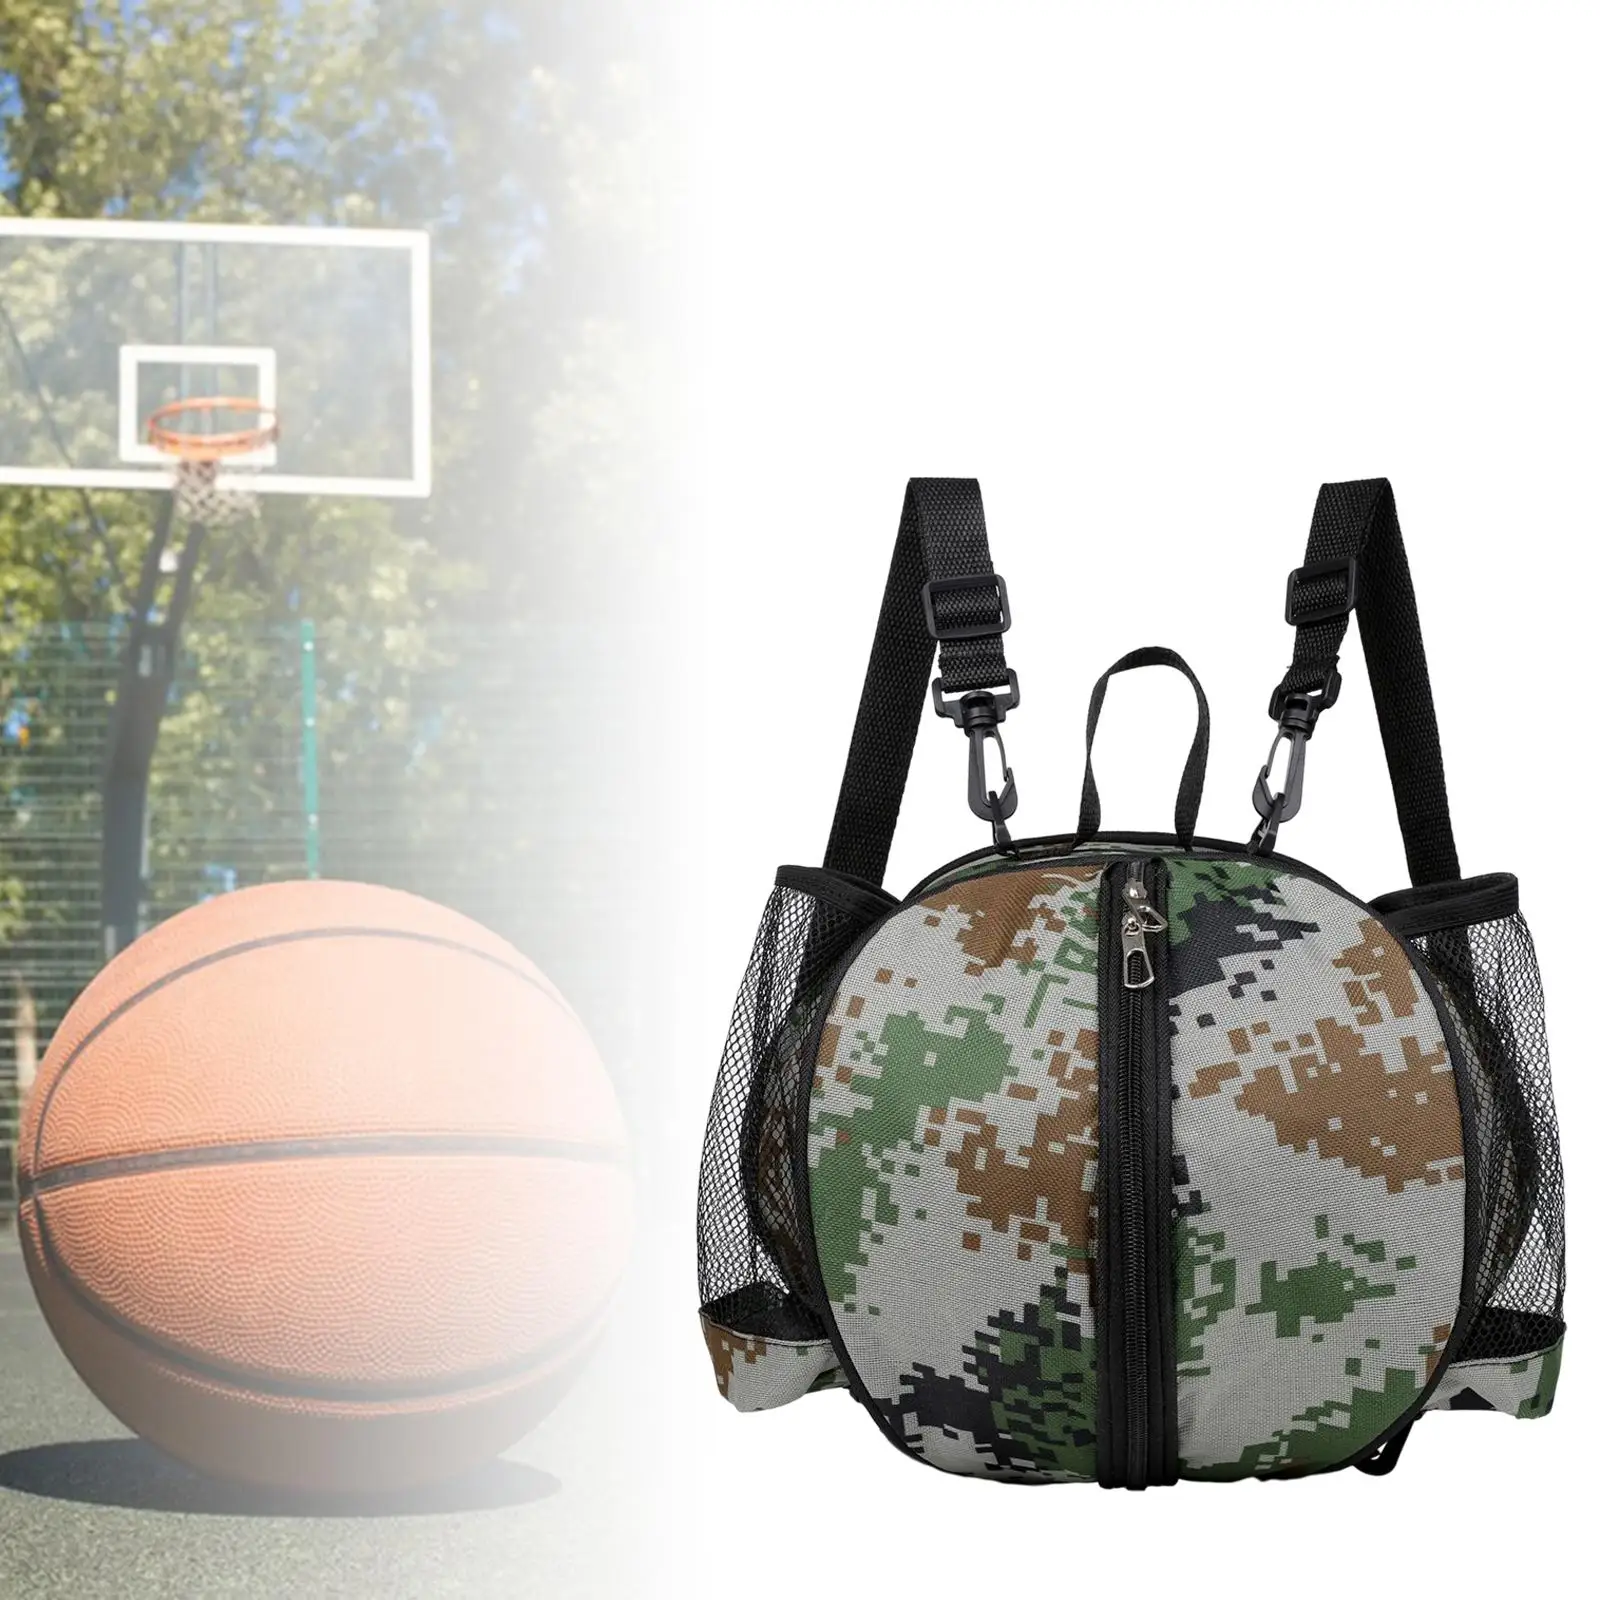 Portable Basketball Shoulder Bag Backpack Basketball Tote Bag , Also for Storing Clothes or Sports Shoes for Boys Girls Durable